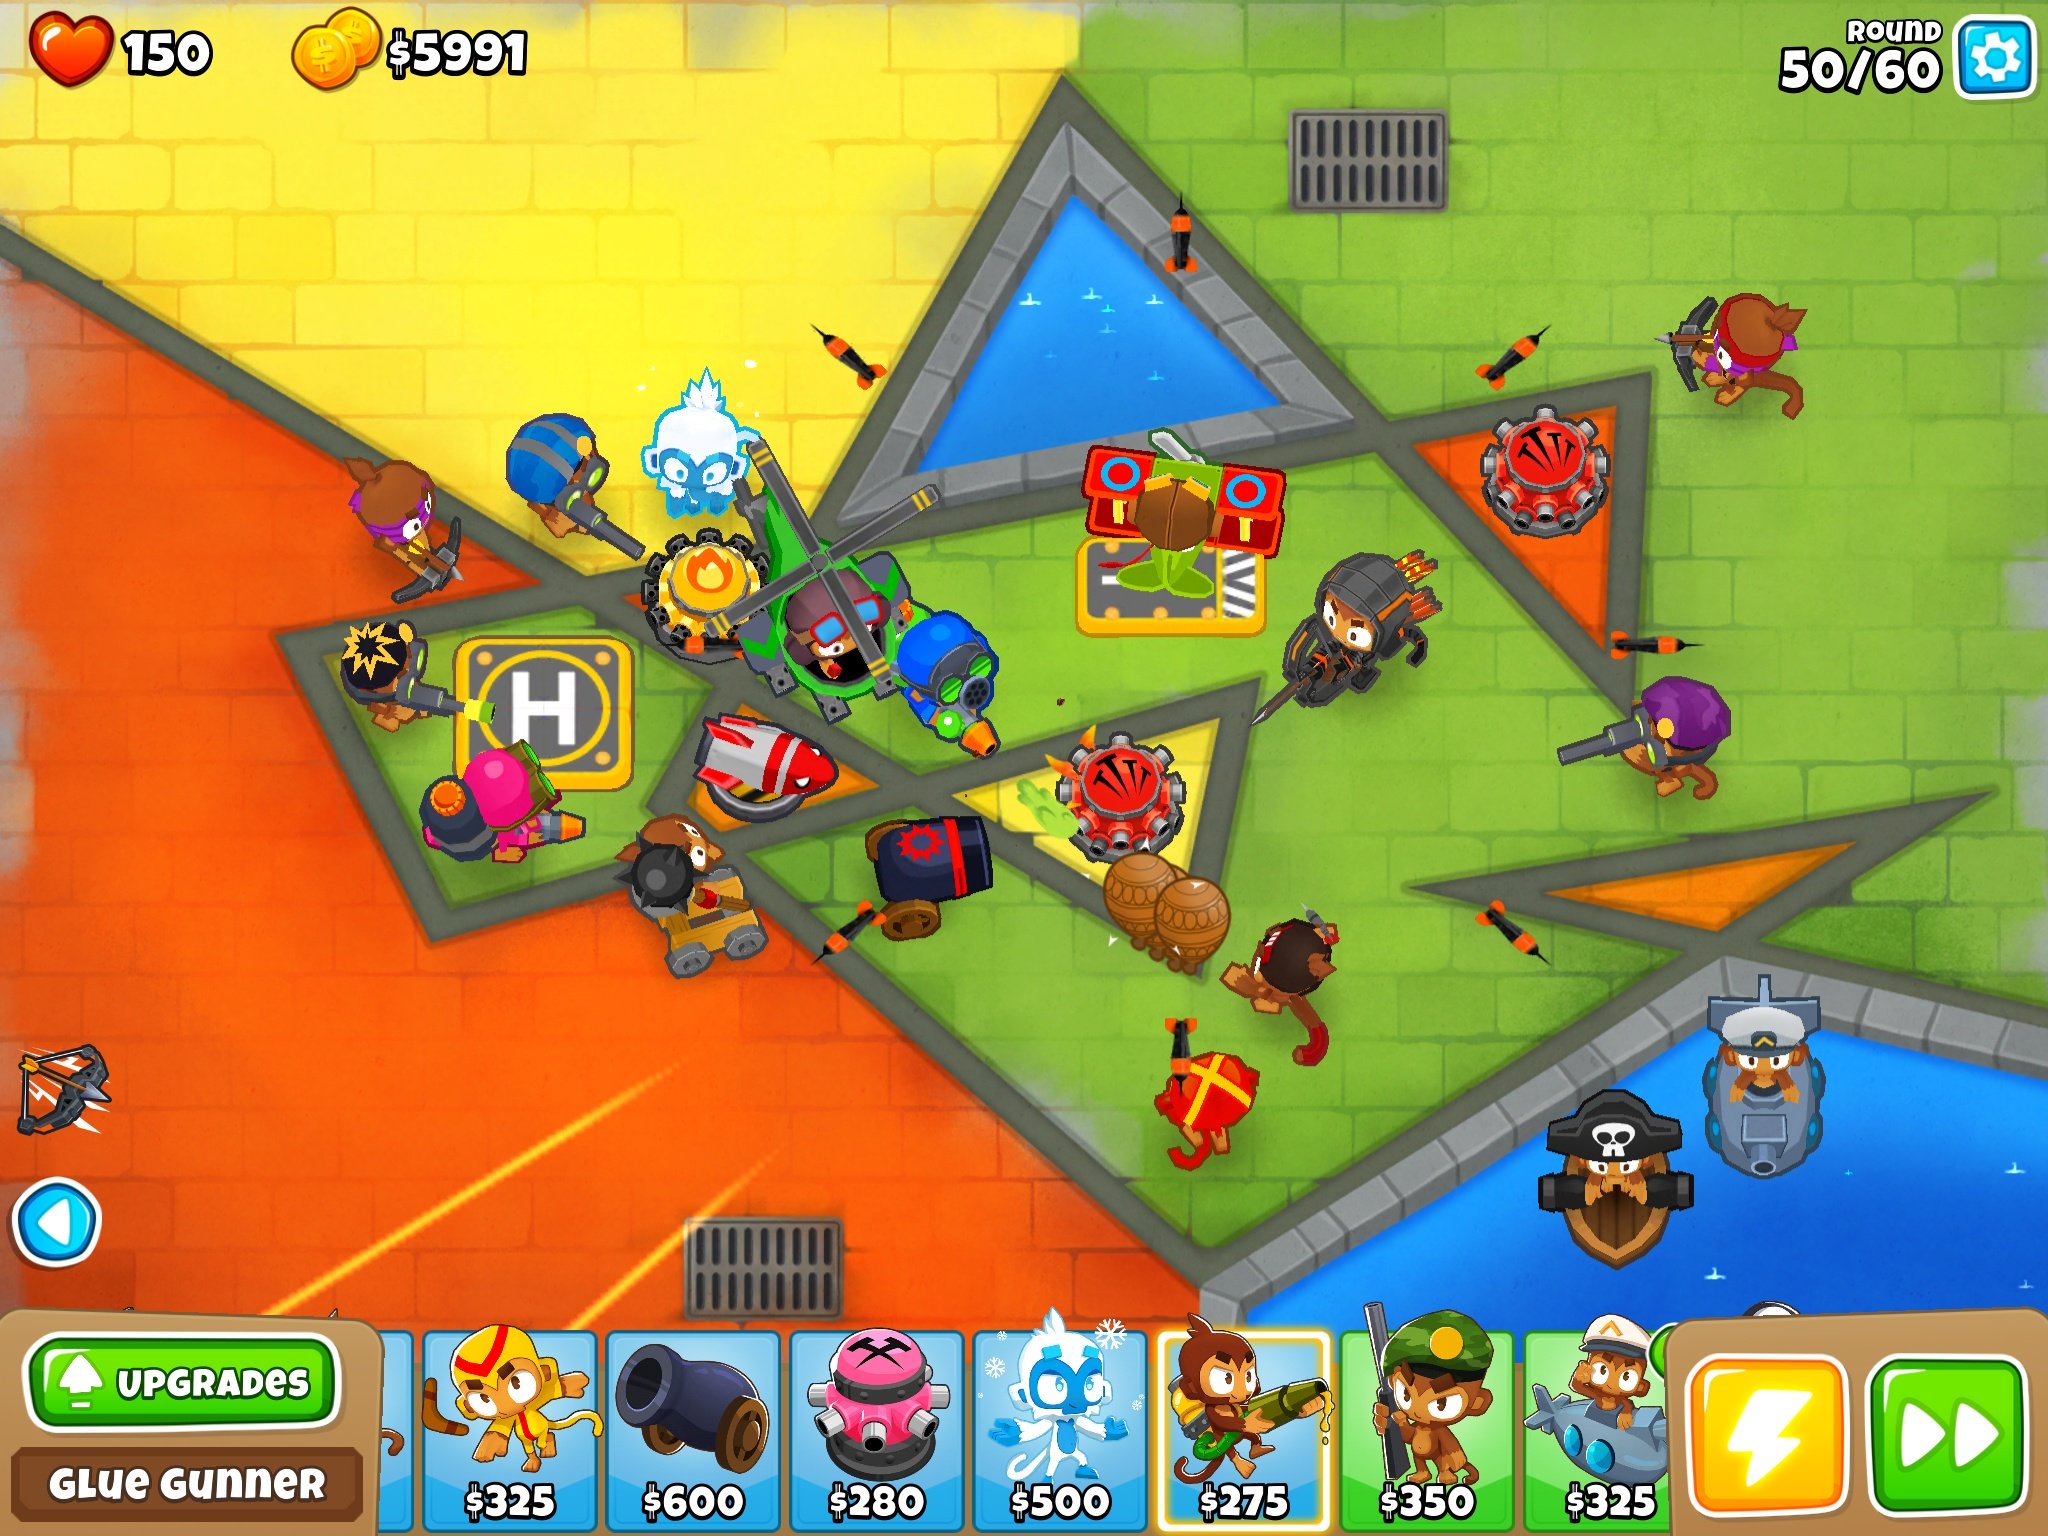 best bloons td 6 strategy